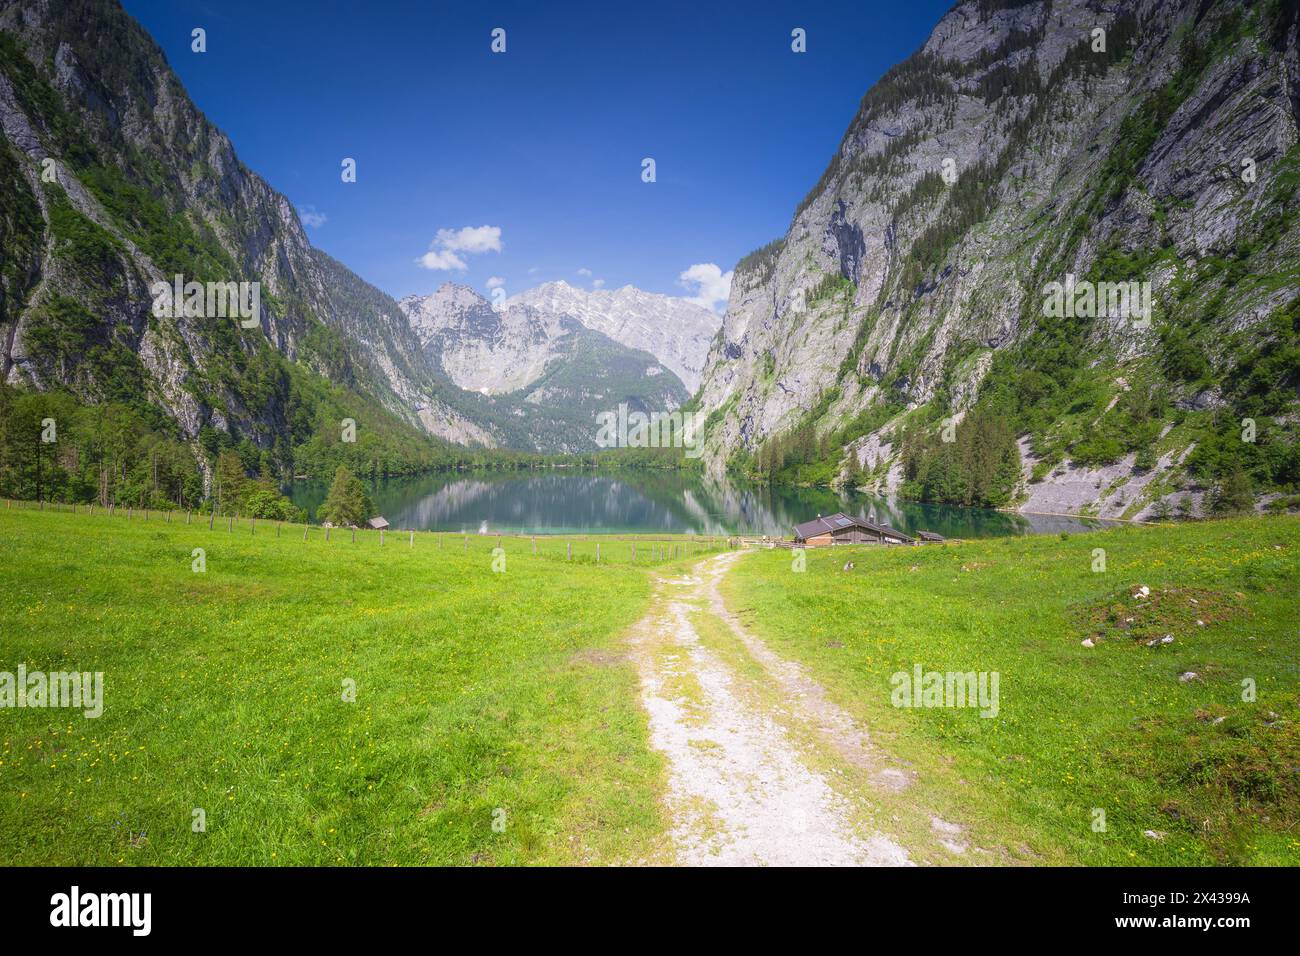 Beautiful view of mountain valley with tracks near Obersee lake in Berchtesgaden National Park, Upper Bavarian Alps, Germany, Europe. Beauty of nature Stock Photo